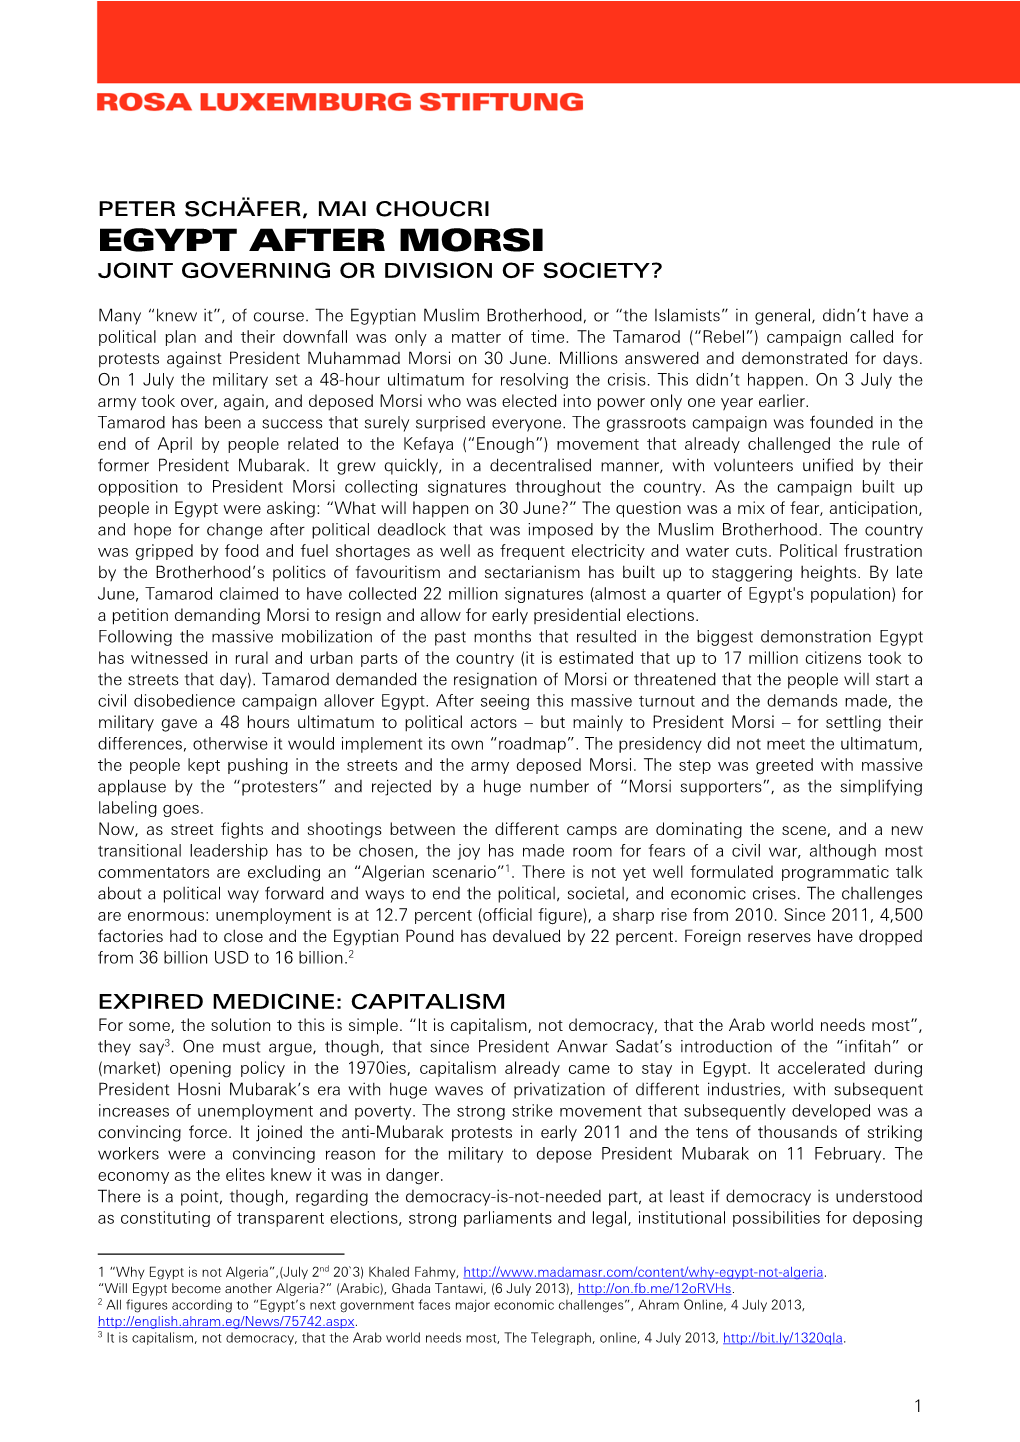 Egypt After Morsi Joint Governing Or Division of Society?